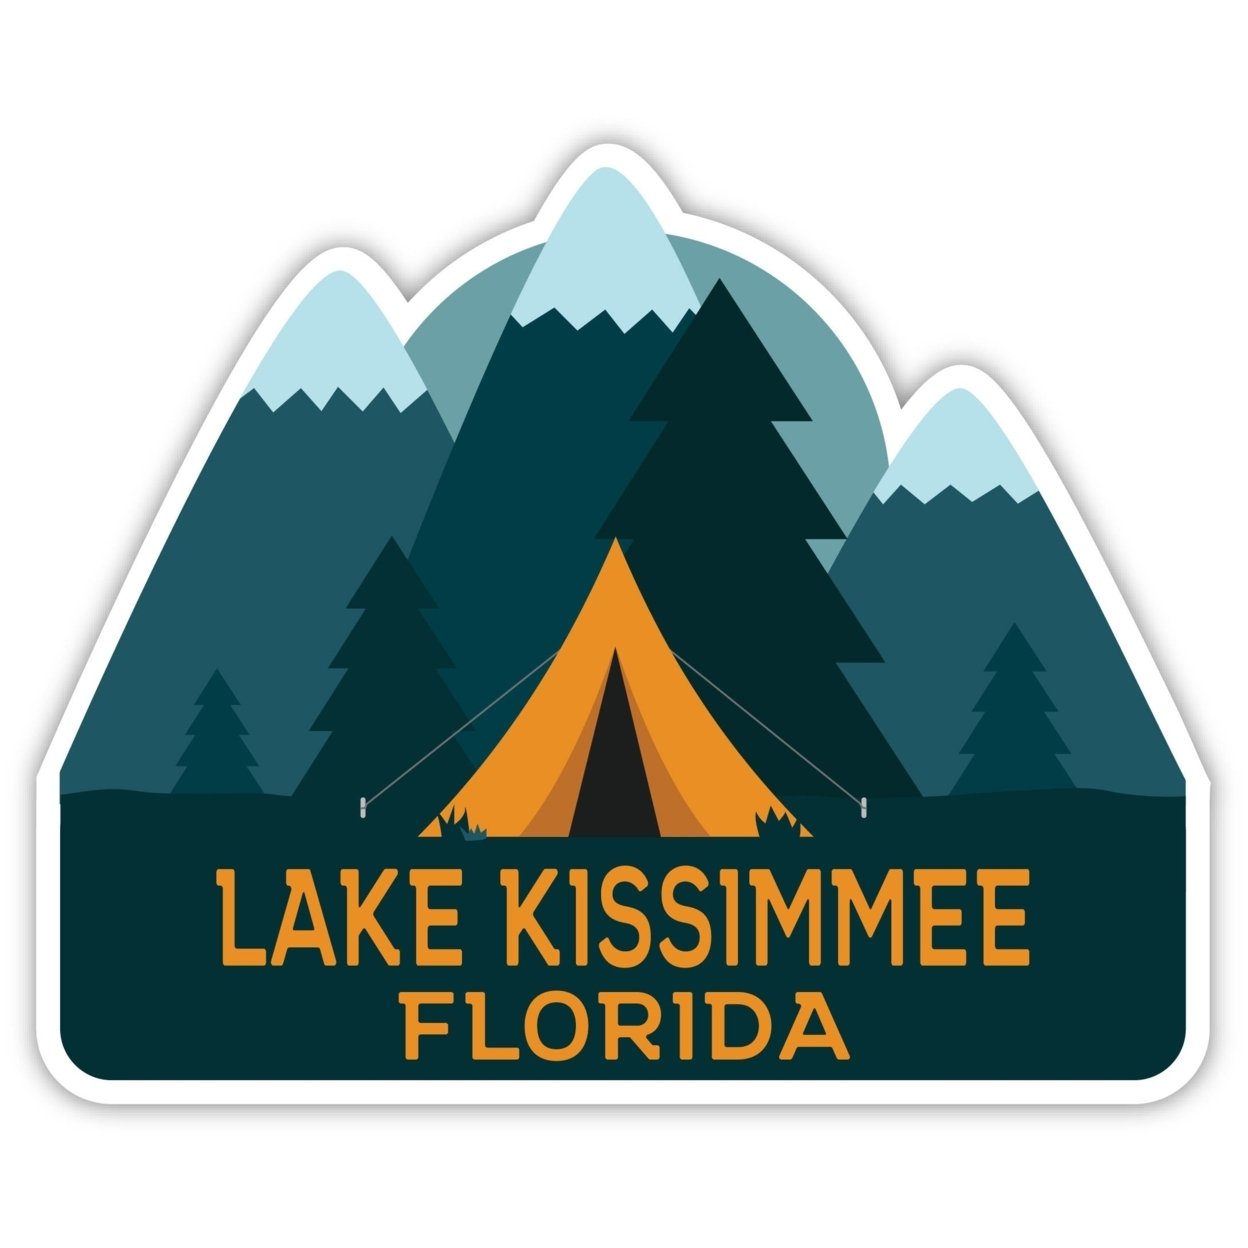 Lake Kissimmee Florida Souvenir Decorative Stickers (Choose Theme And Size) - 4-Inch, Tent